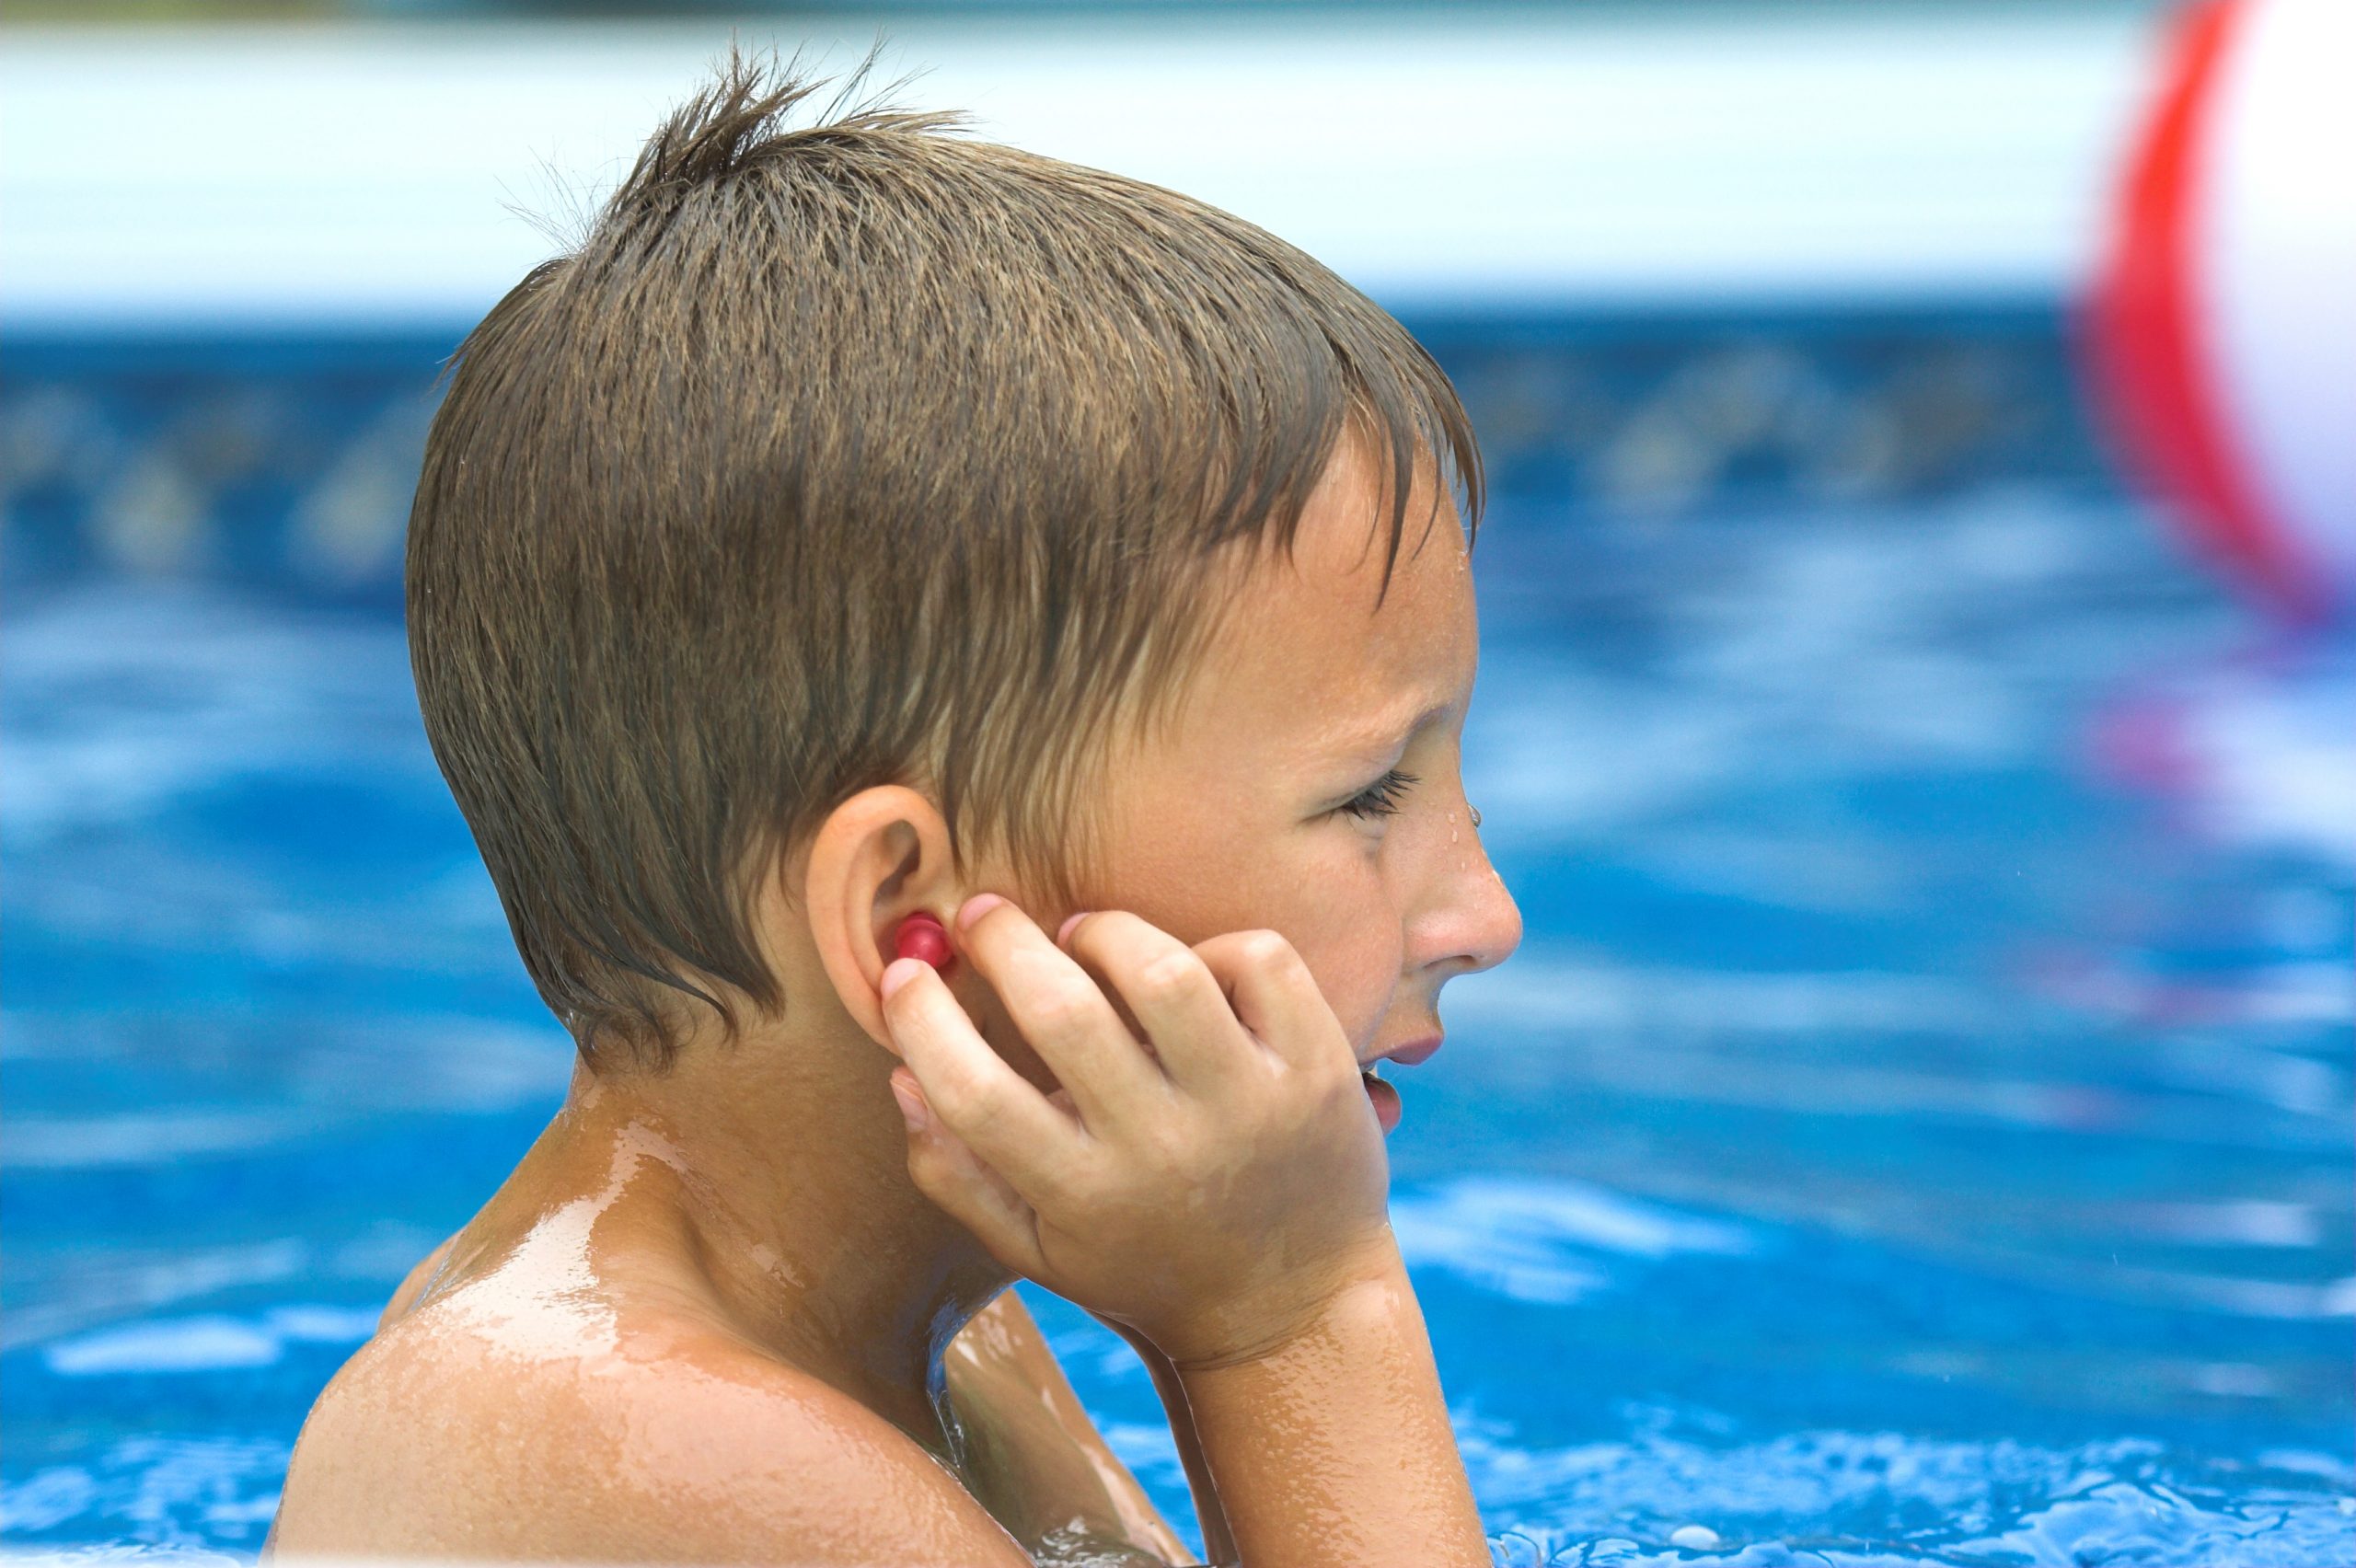 a child clutching his ear while swimming in a pool